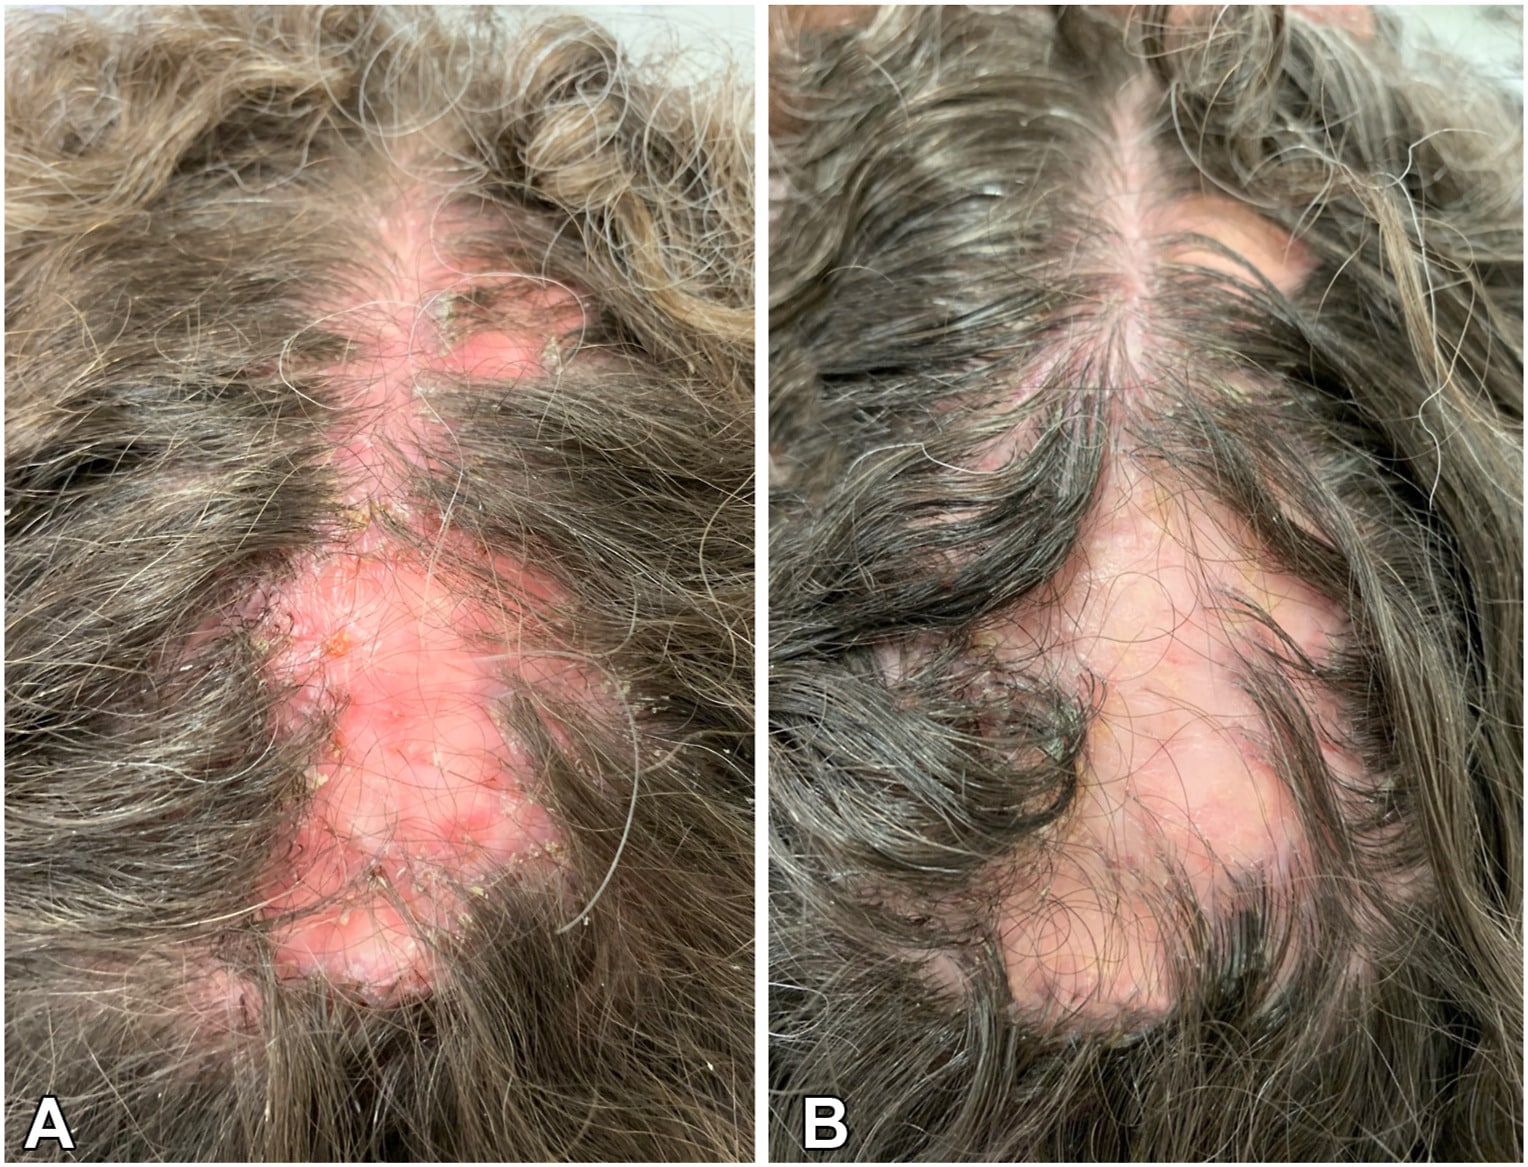 hair transplant surgery after folliculitis possible